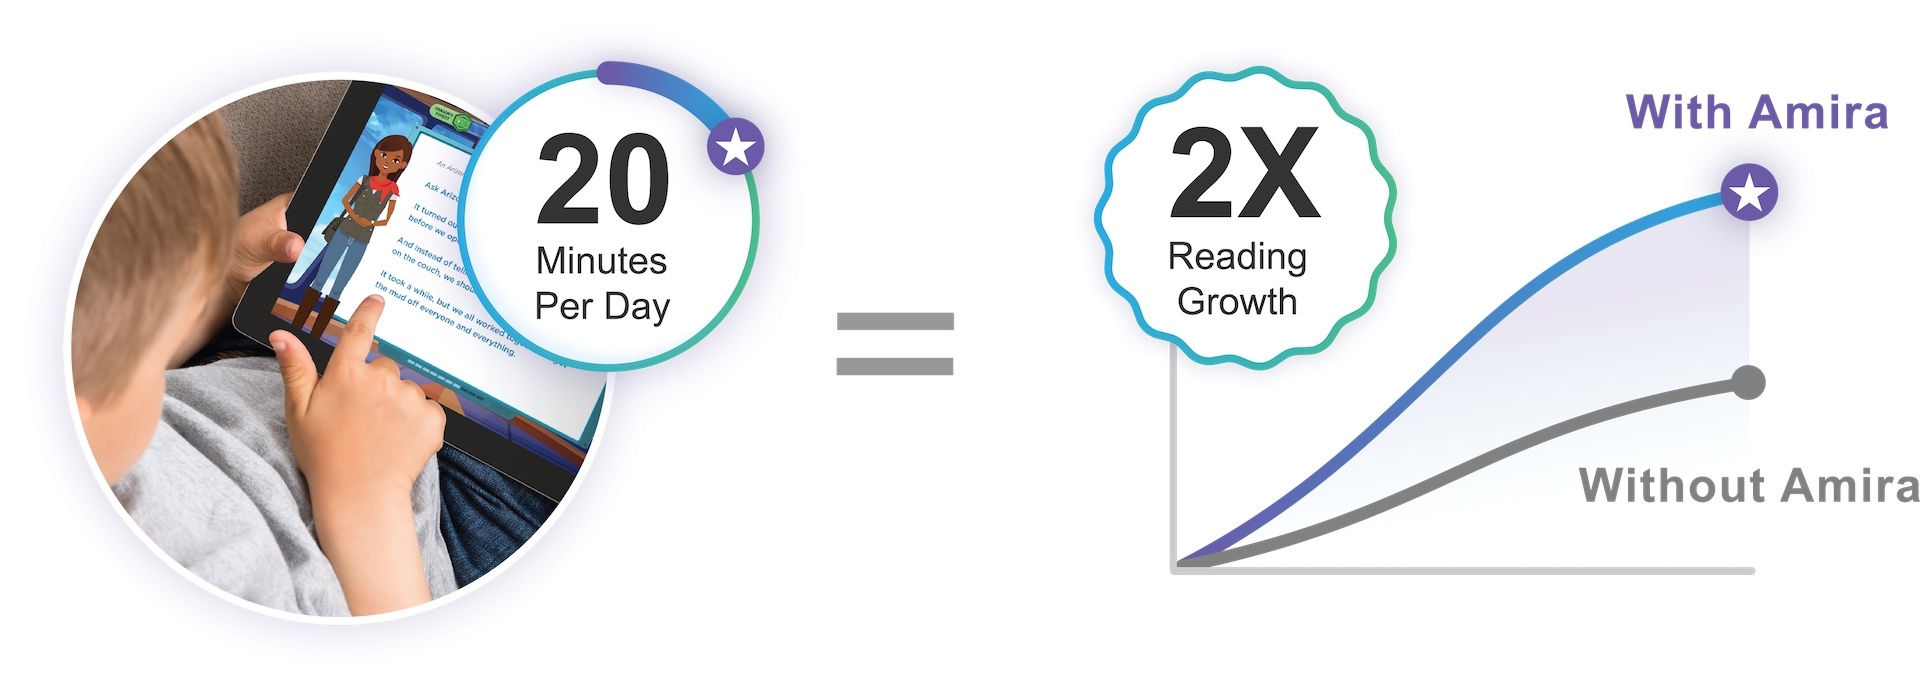 Child playing the Amira & The Storycraft app on a tablet next to a picture of a chart showing reading improvement over time with Amira & The Storycraft vs without. There is text on the image as well describing that just 20 minutes per day can equal doubled reading growth.